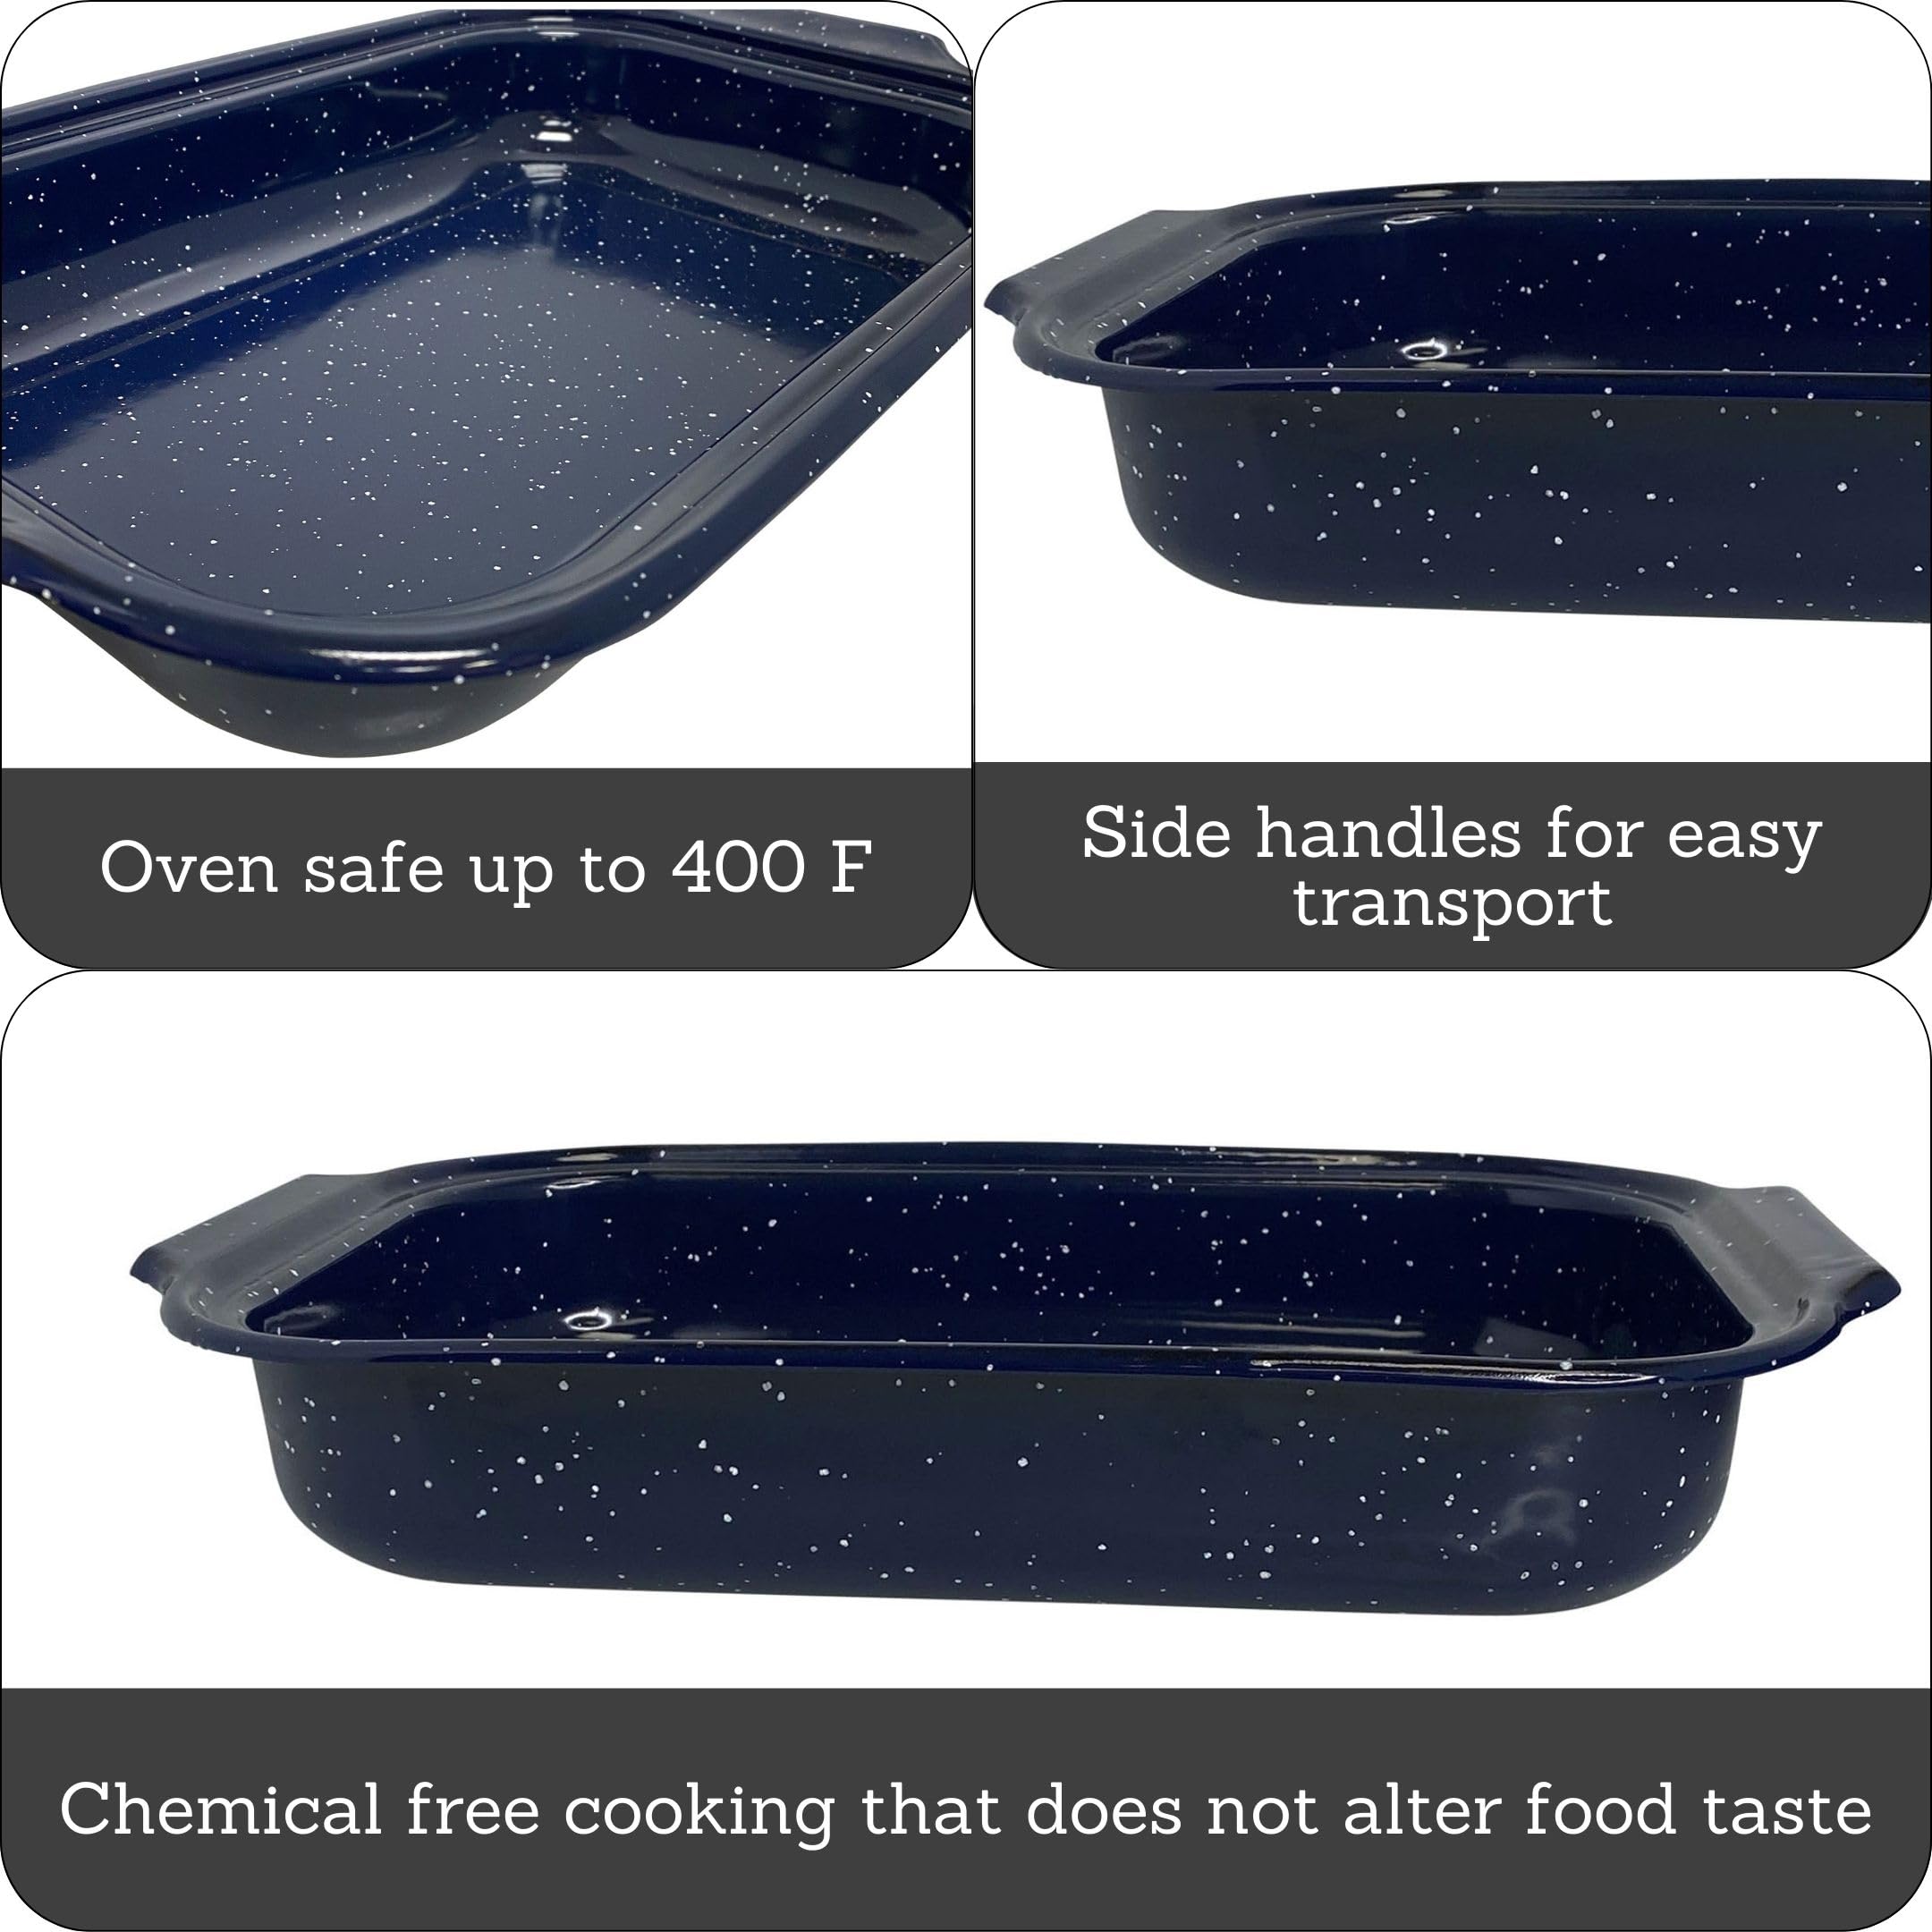 IMUSA USA Traditional Blue Speckled Roaster/Baking Pan 16" x 12”